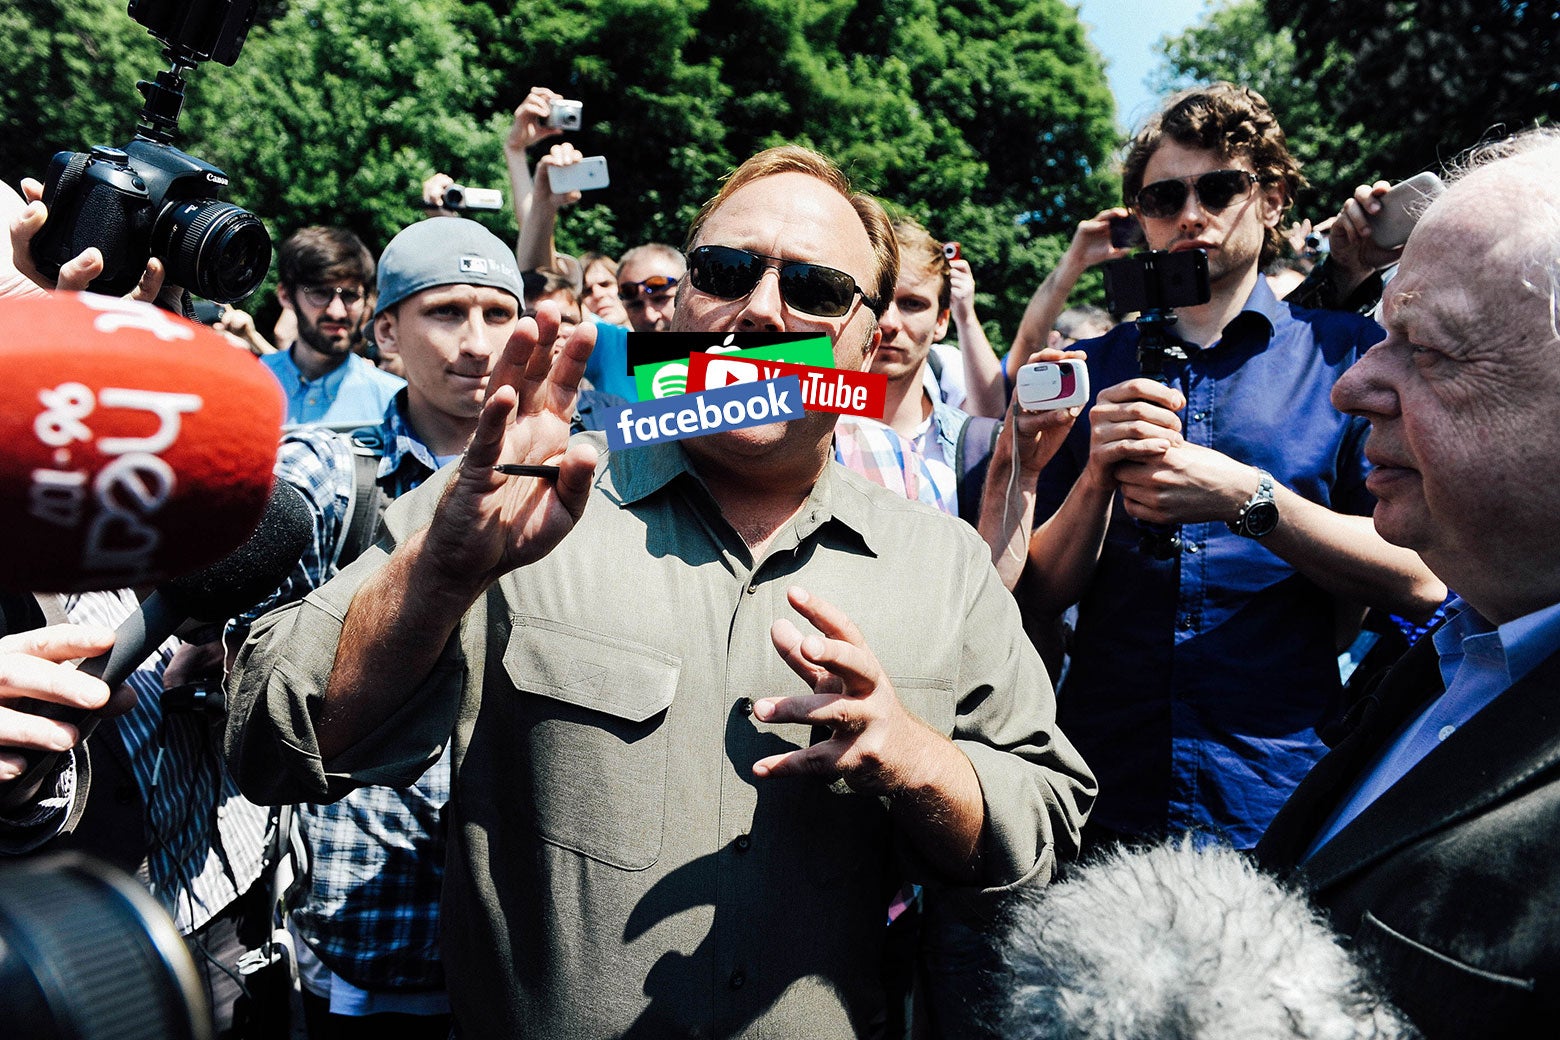 Alex Jones speaks to the media in Watford, Hertfordshire, England, in 2013. A series of social media logos have been digitally pasted over his mouth.